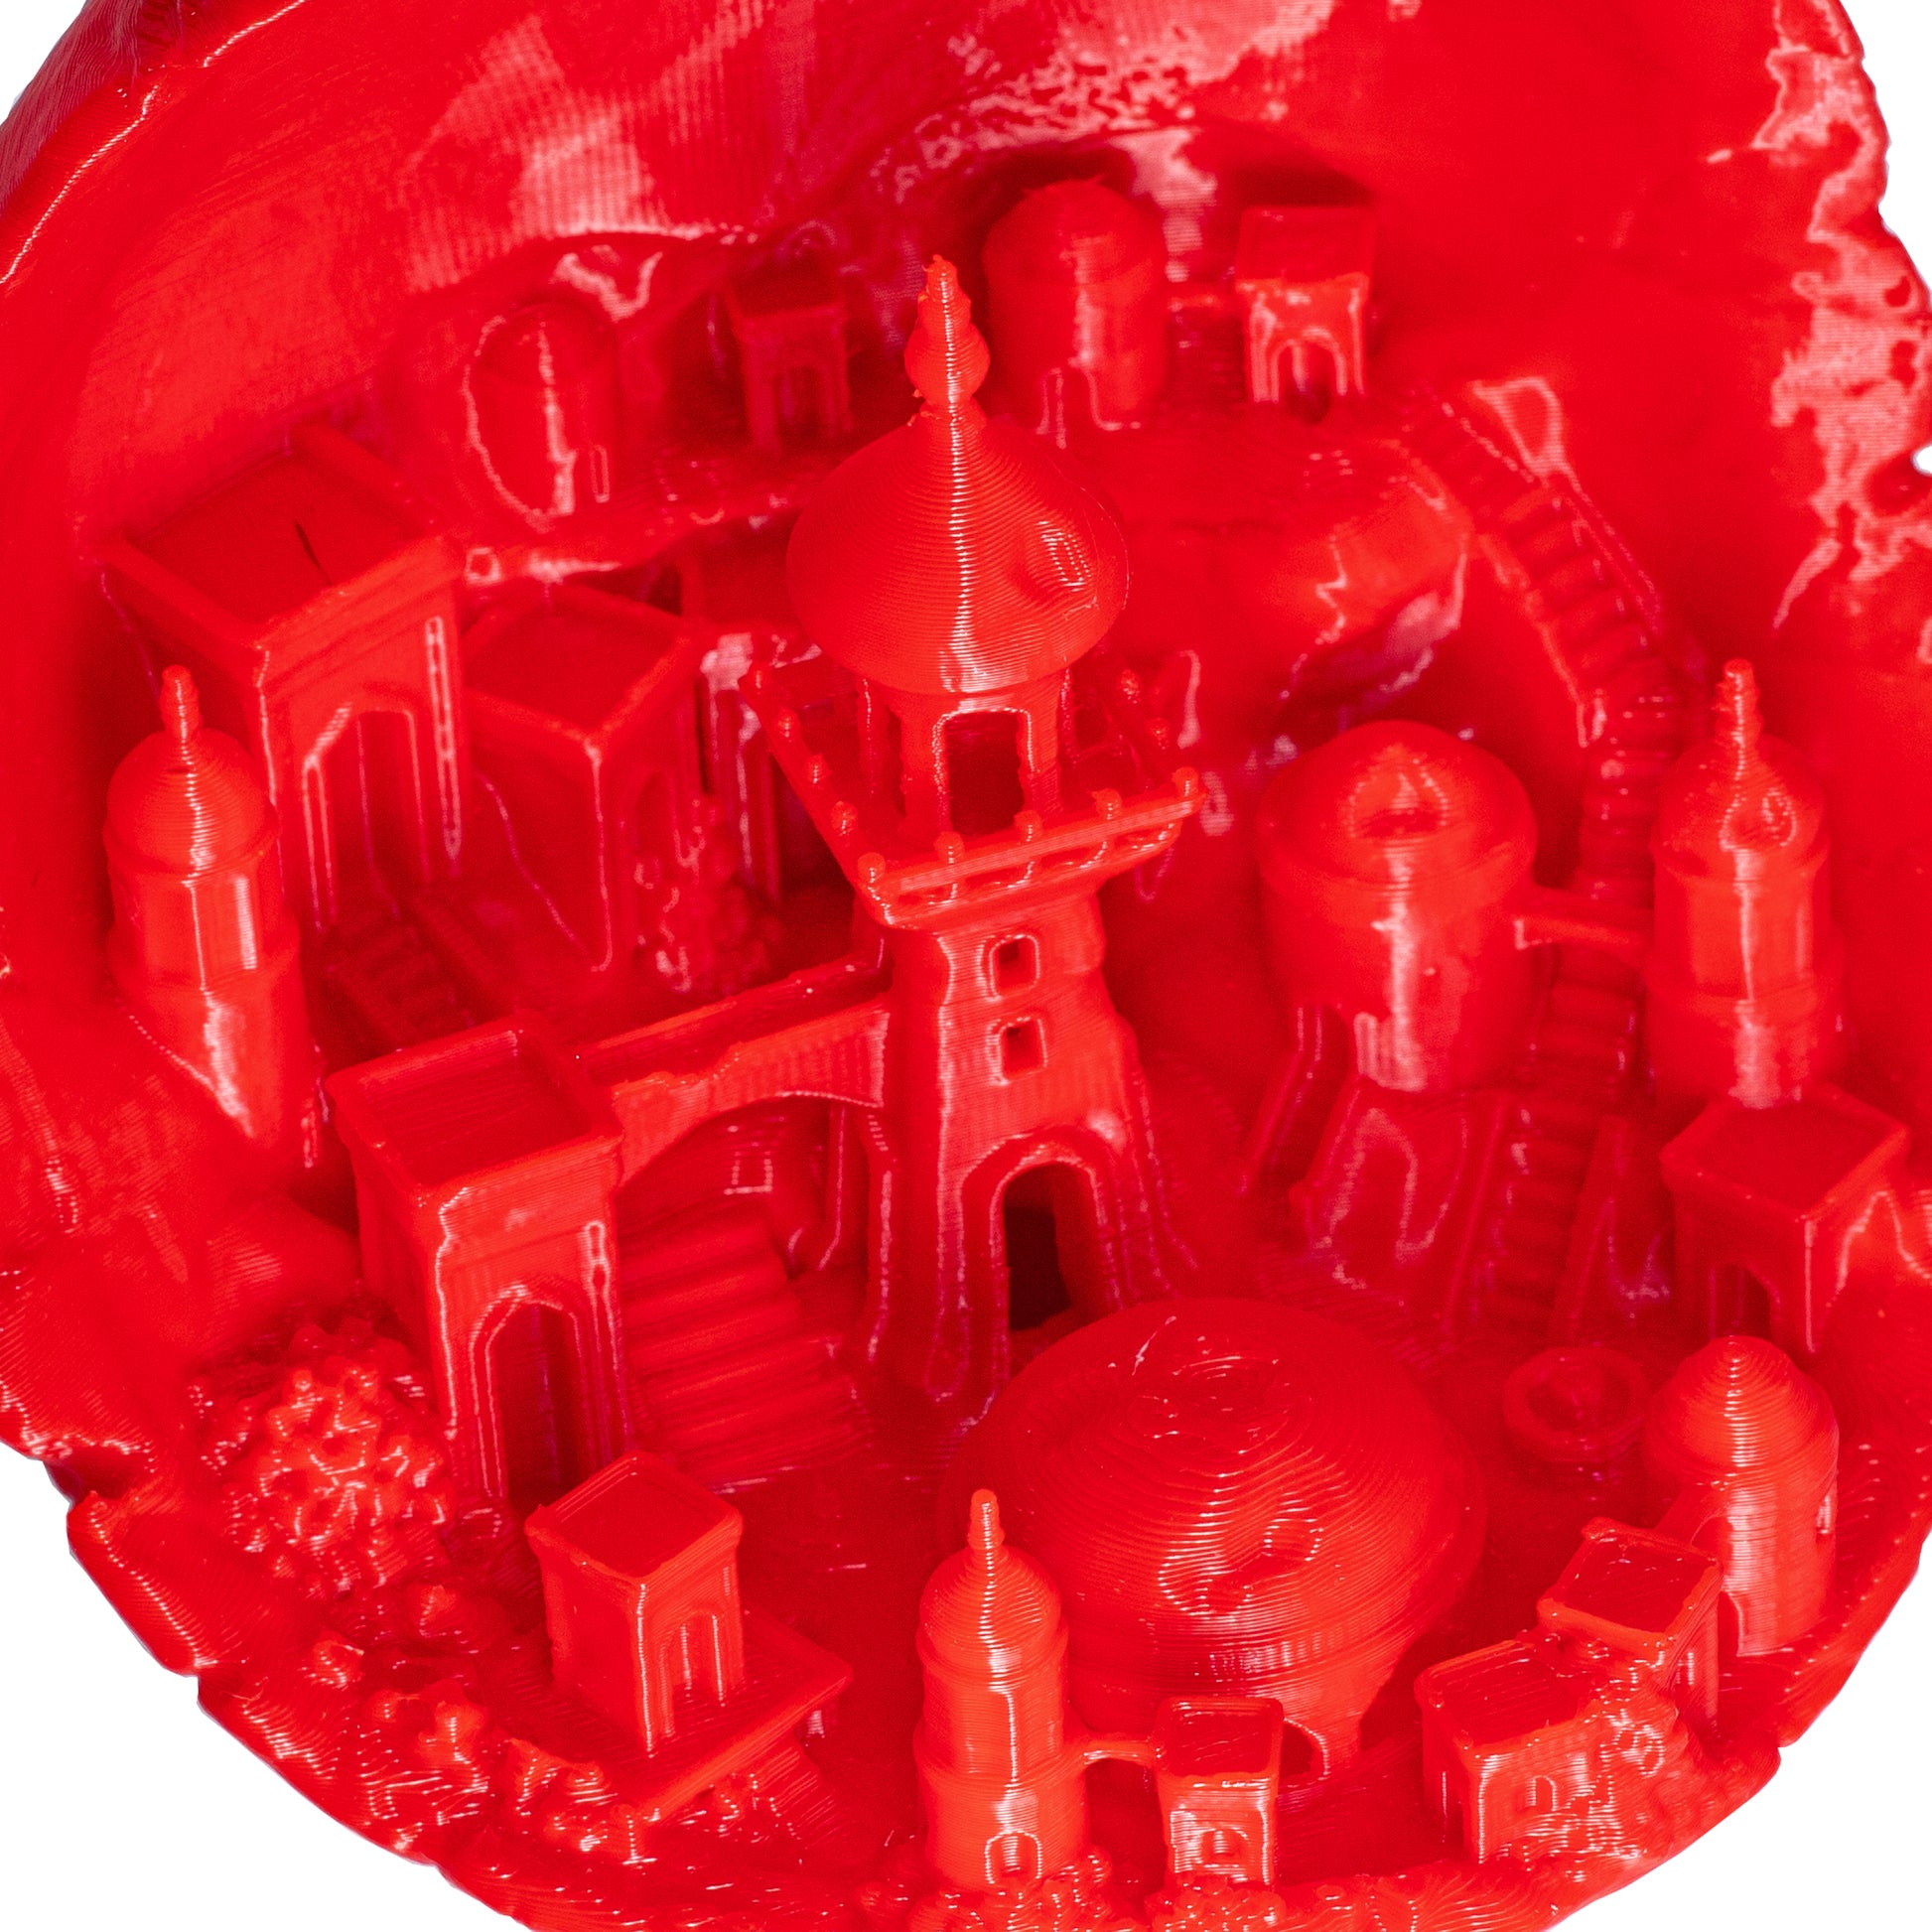 VOXELPLA PLA 1.75mm Red for 3D printing Test Print 2